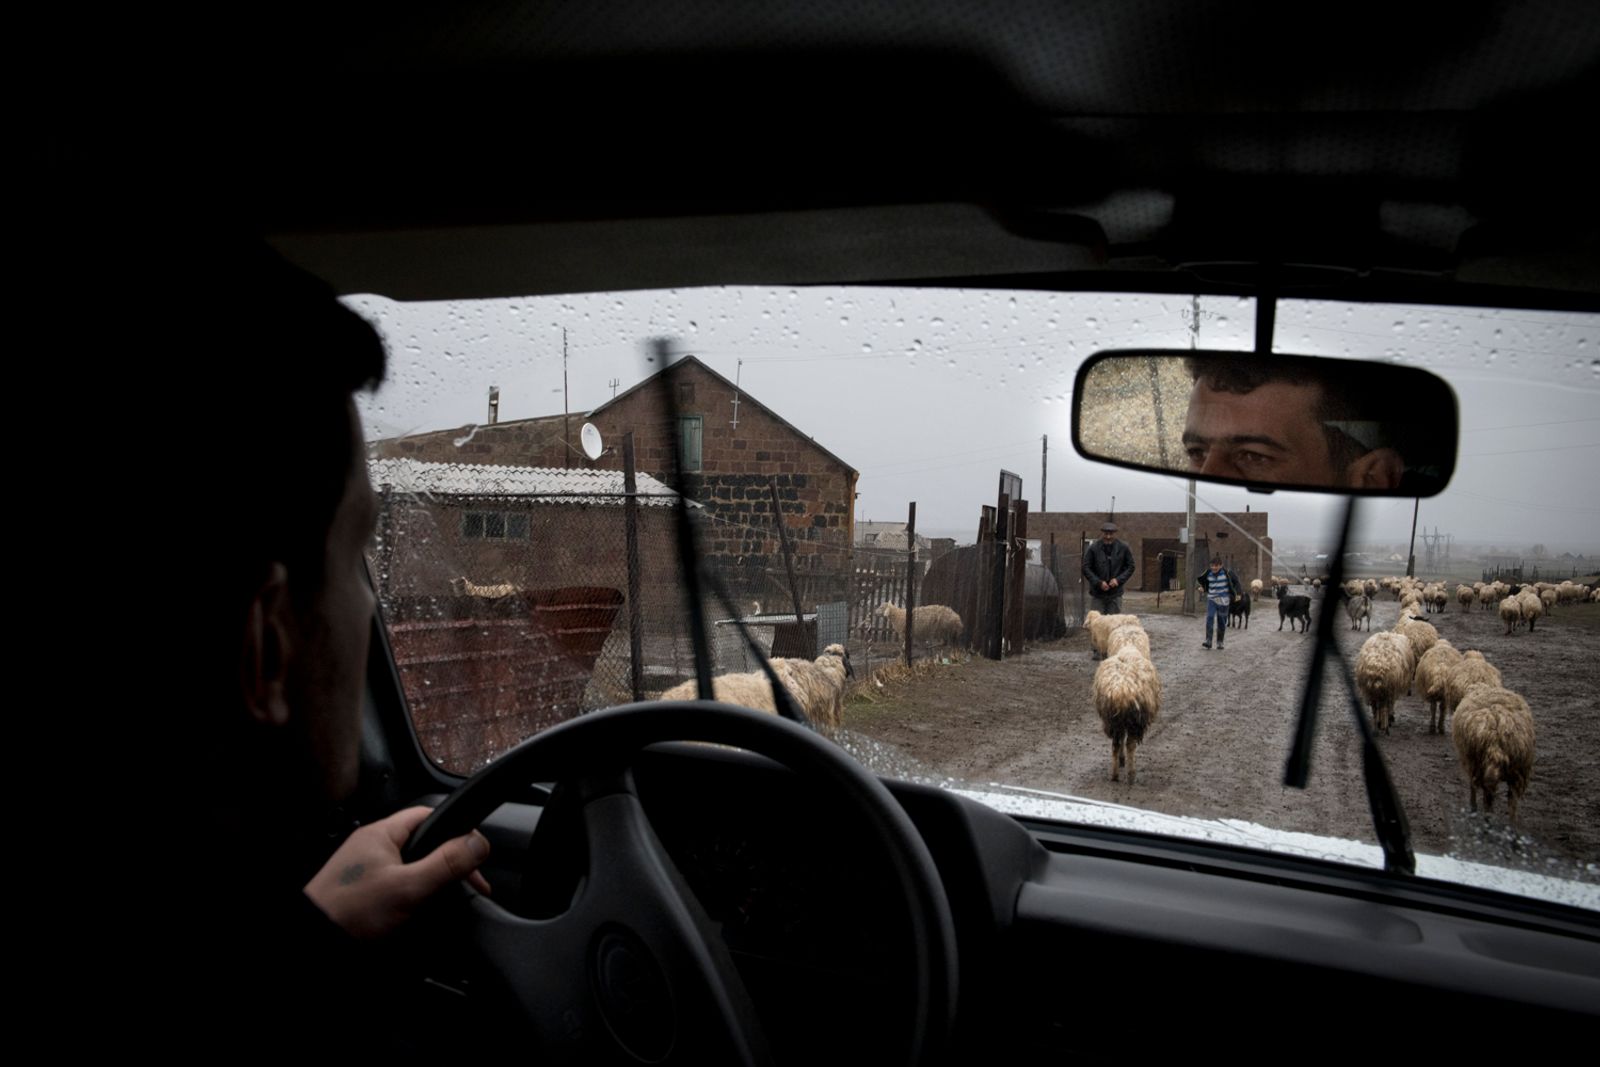 © Michela&amp;Emanuela Colombo - Image from the PEACOCK BLUES The Armenian Yazidis. photography project